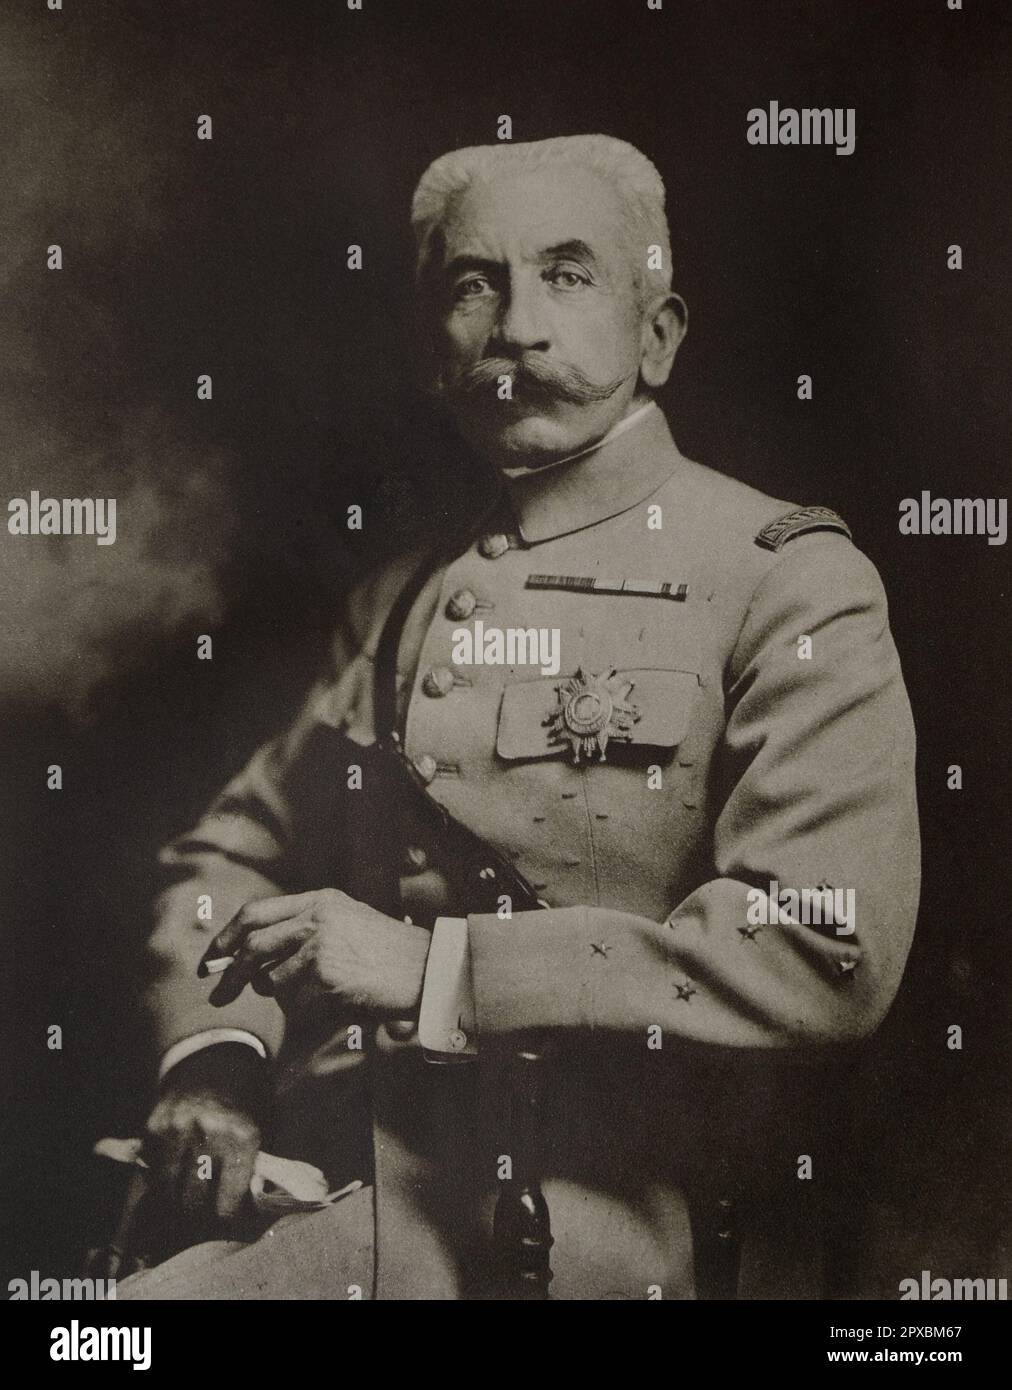 French general Lyautey.  Louis Hubert Gonzalve Lyautey (1854 – 1934) was a French Army general and colonial administrator. After serving in Indochina and Madagascar, he became the first French Resident-General in Morocco from 1912 to 1925. Early in 1917 he served briefly as Minister of War. From 1921 he was a Marshal of France. He was dubbed the French empire builder, and in 1931 made the cover of Time. Stock Photo